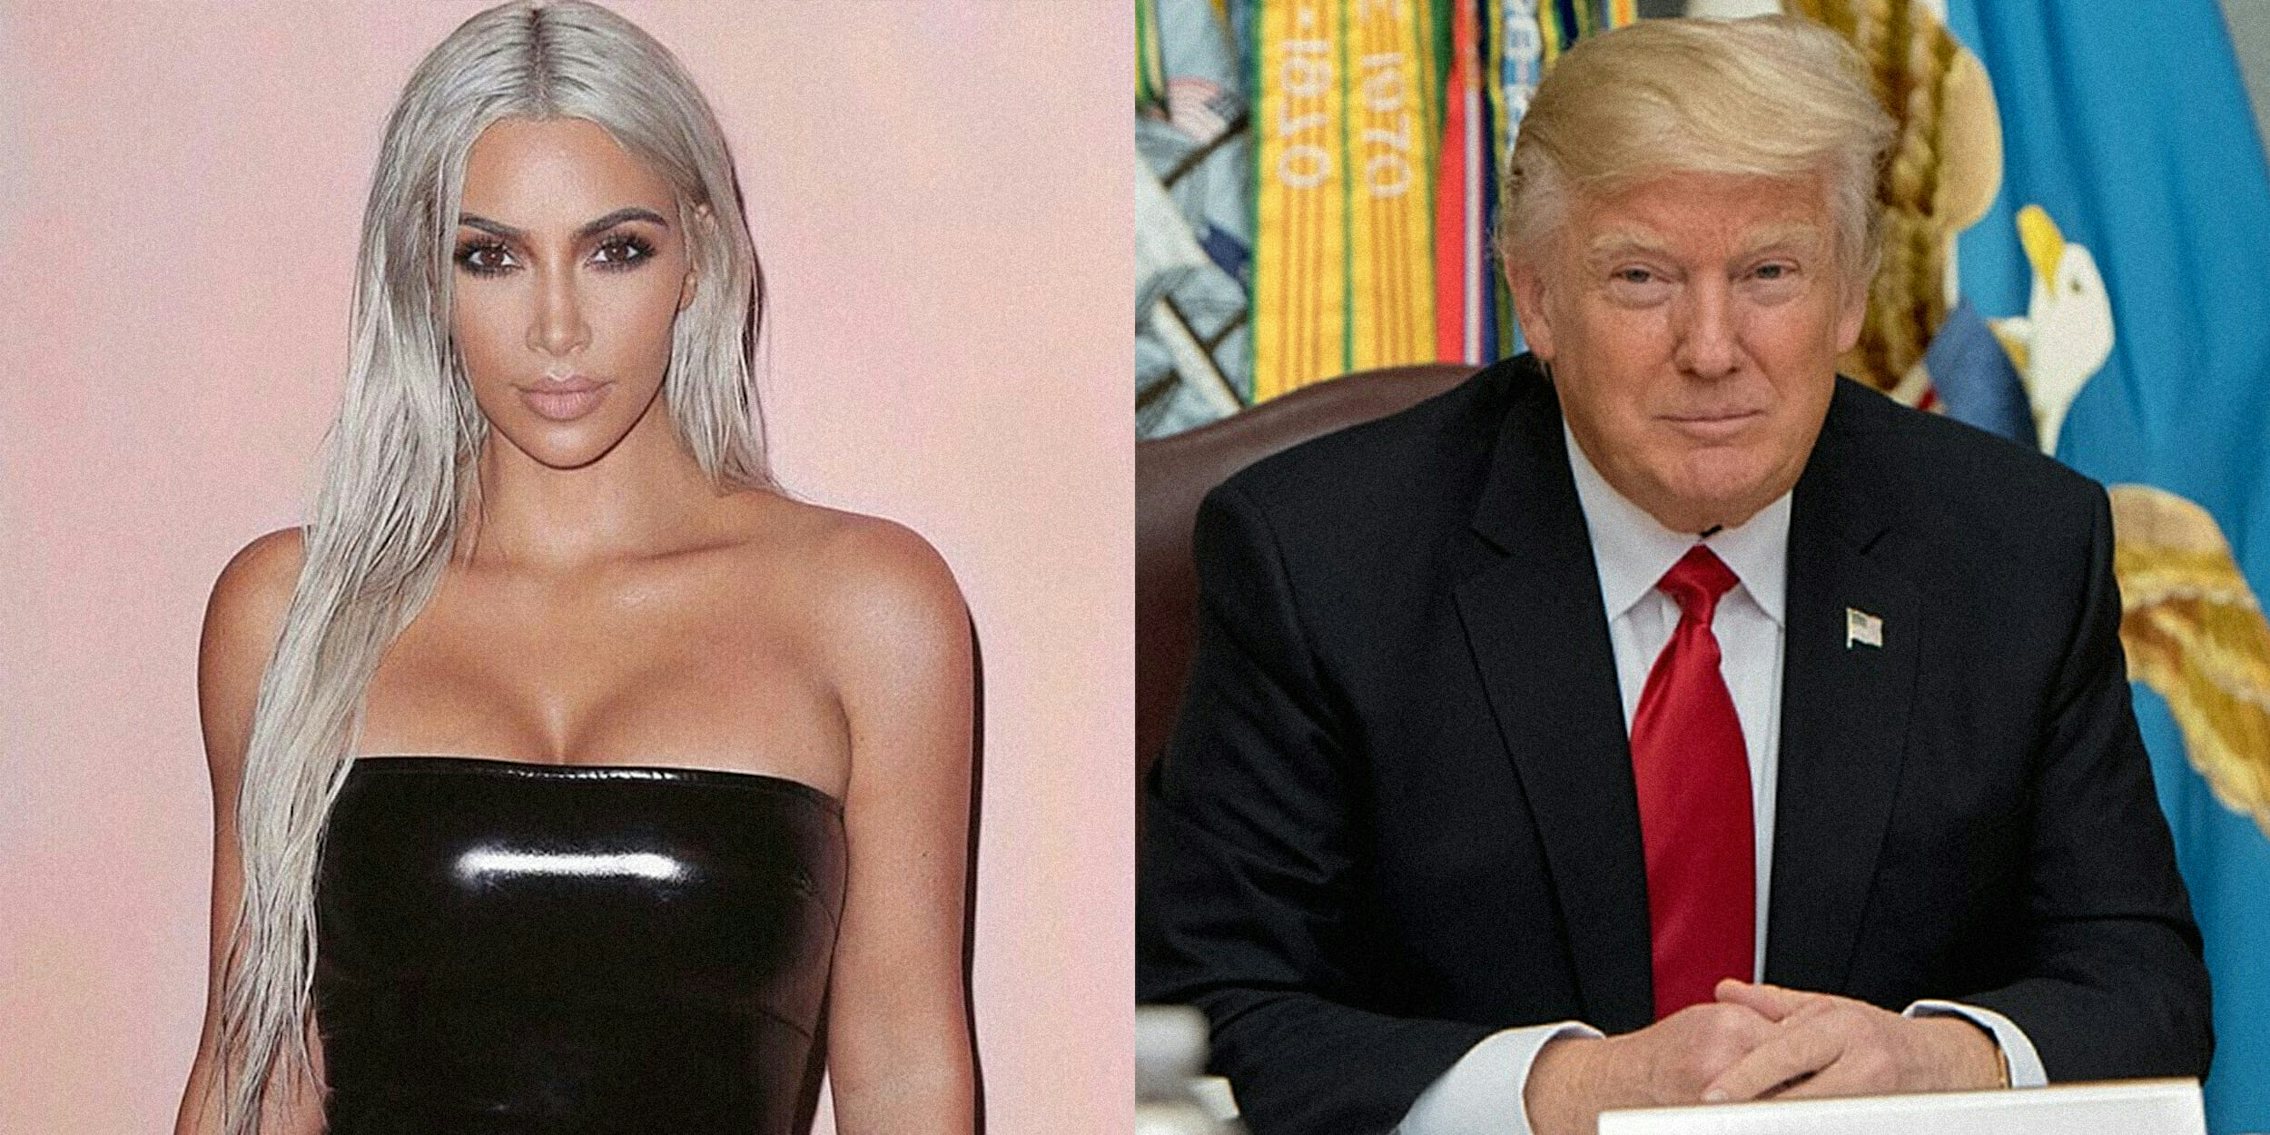 Donald Trump's Twitter followers post more about the Kardashians and pop culture than they do about politics, new data has found